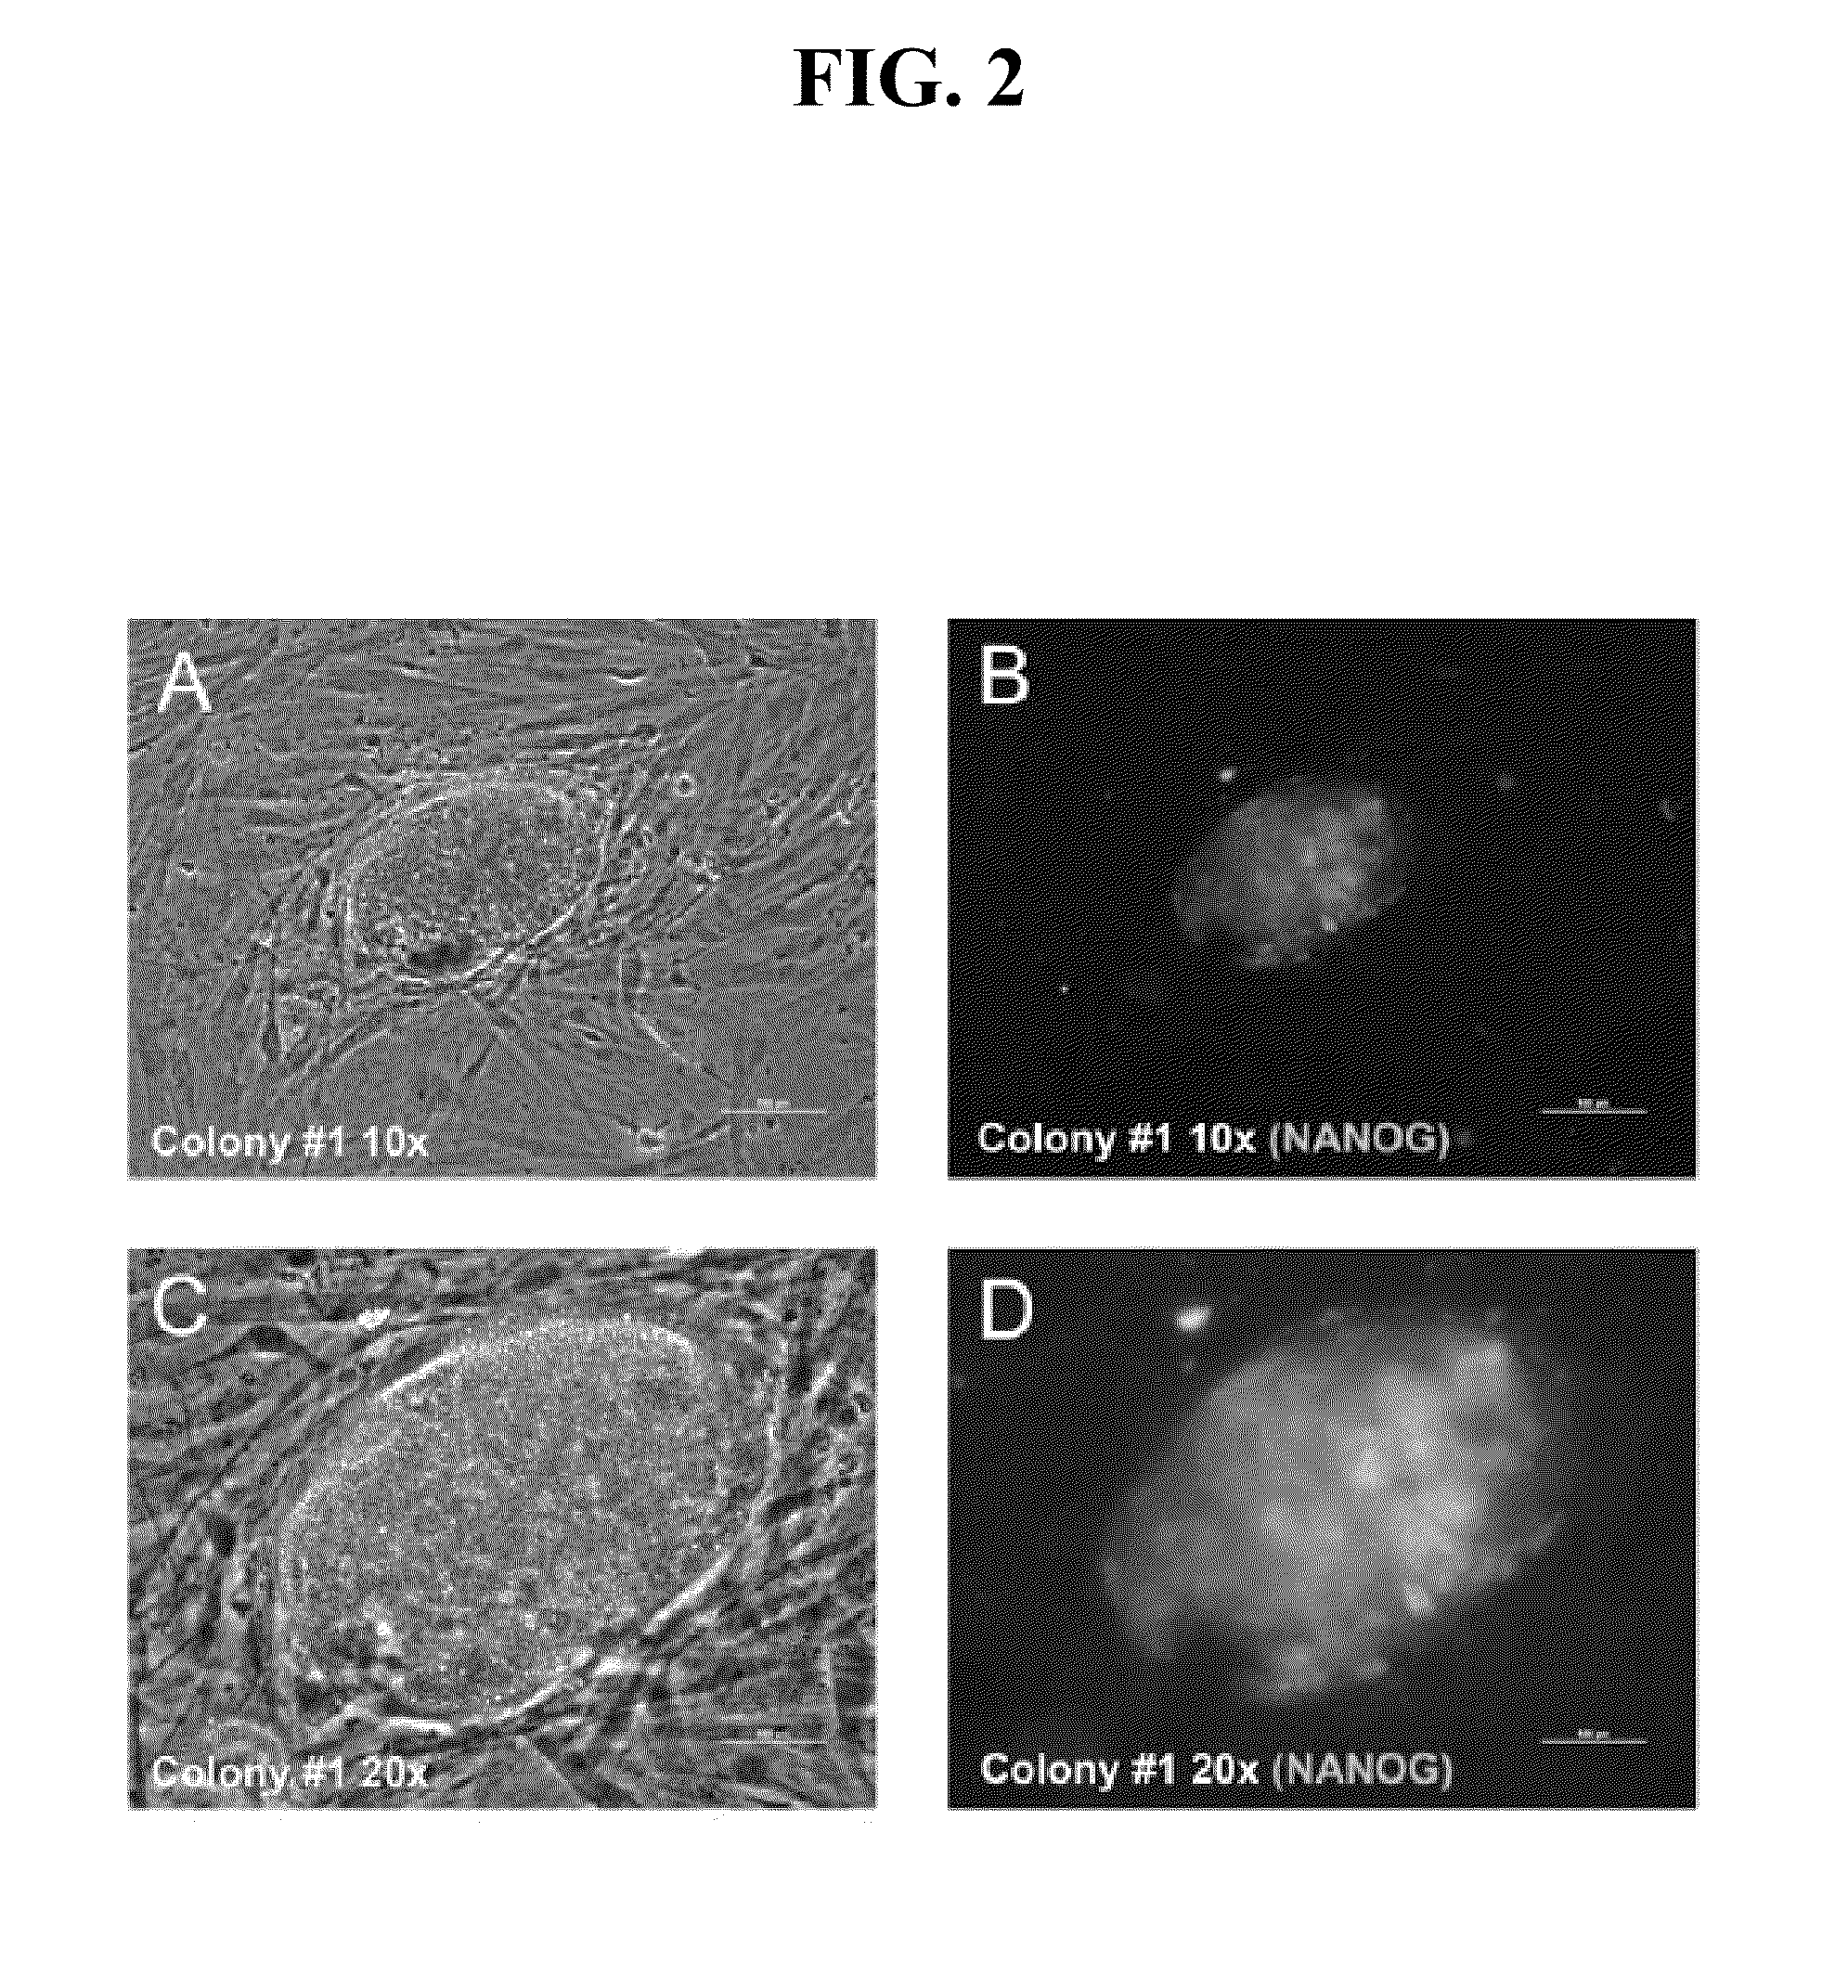 RNA preparations comprising purified modified RNA for reprogramming cells